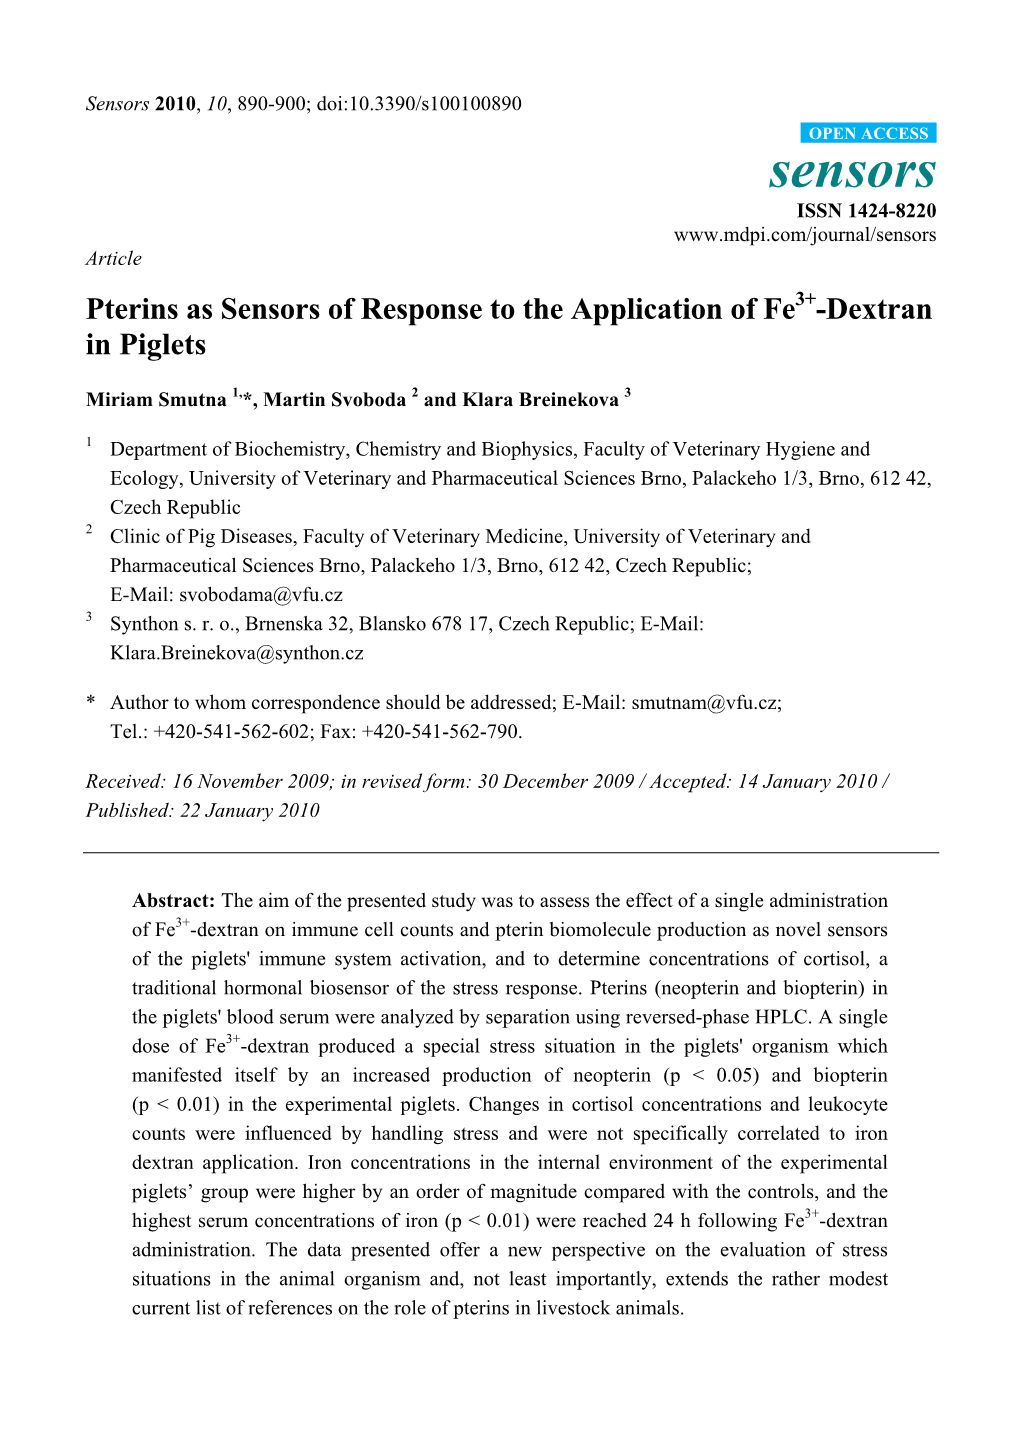 Pterins As Sensors of Response to the Application of Fe3+-Dextran in Piglets